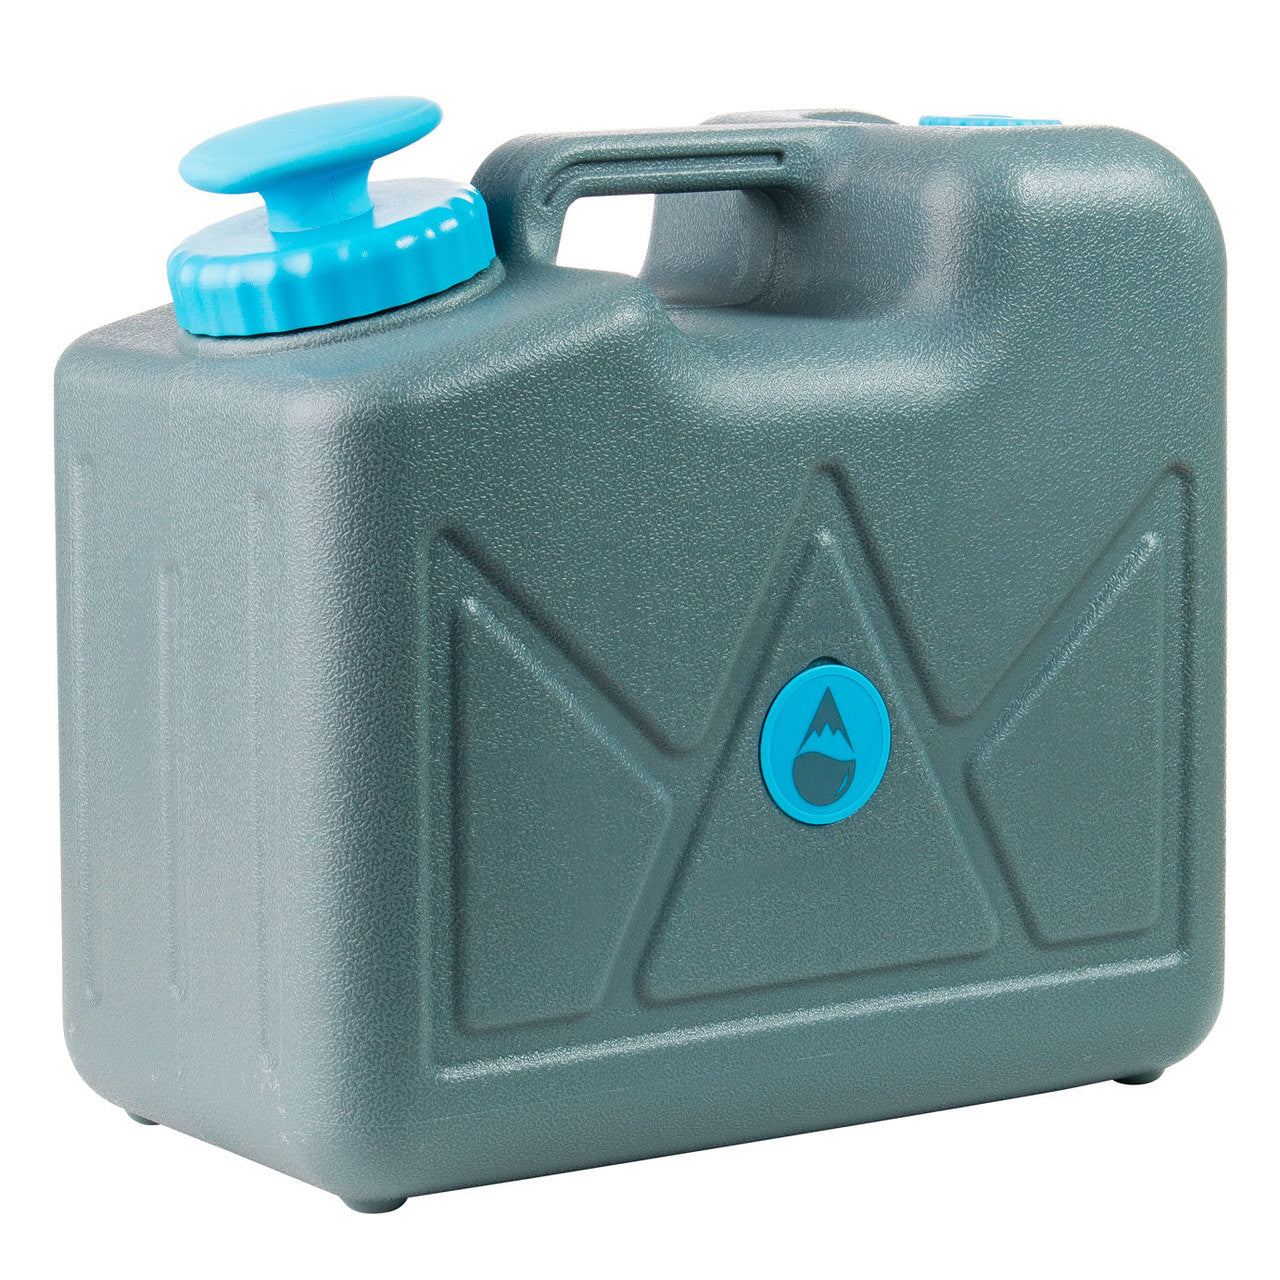 HydroBlu - Pressurized Jerry Can Water Filter